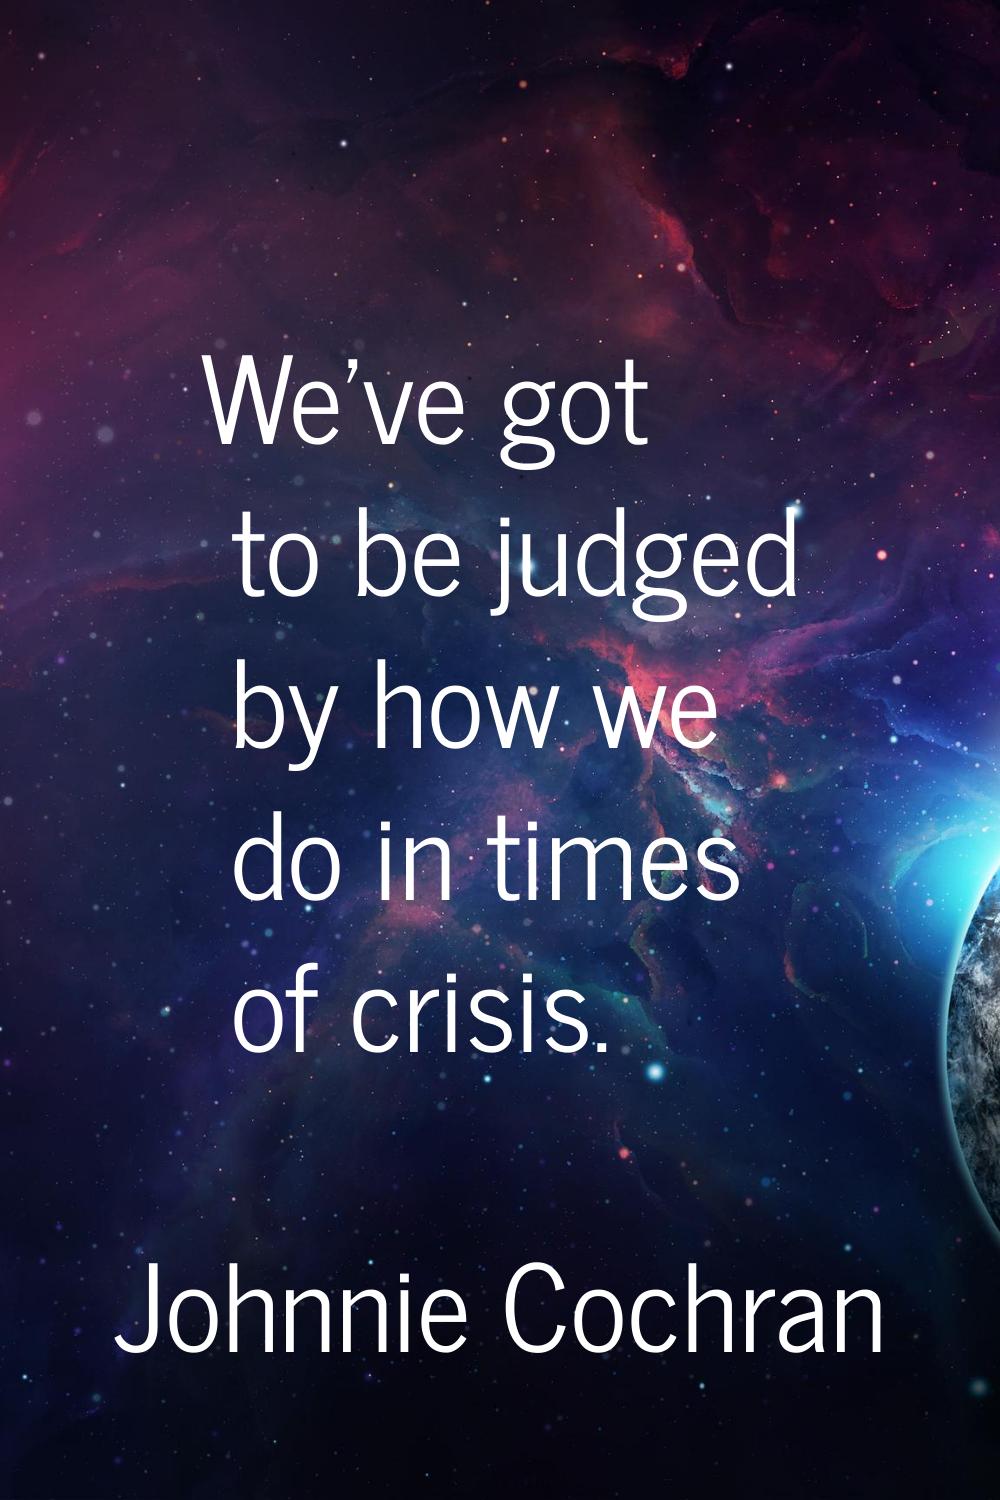 We've got to be judged by how we do in times of crisis.